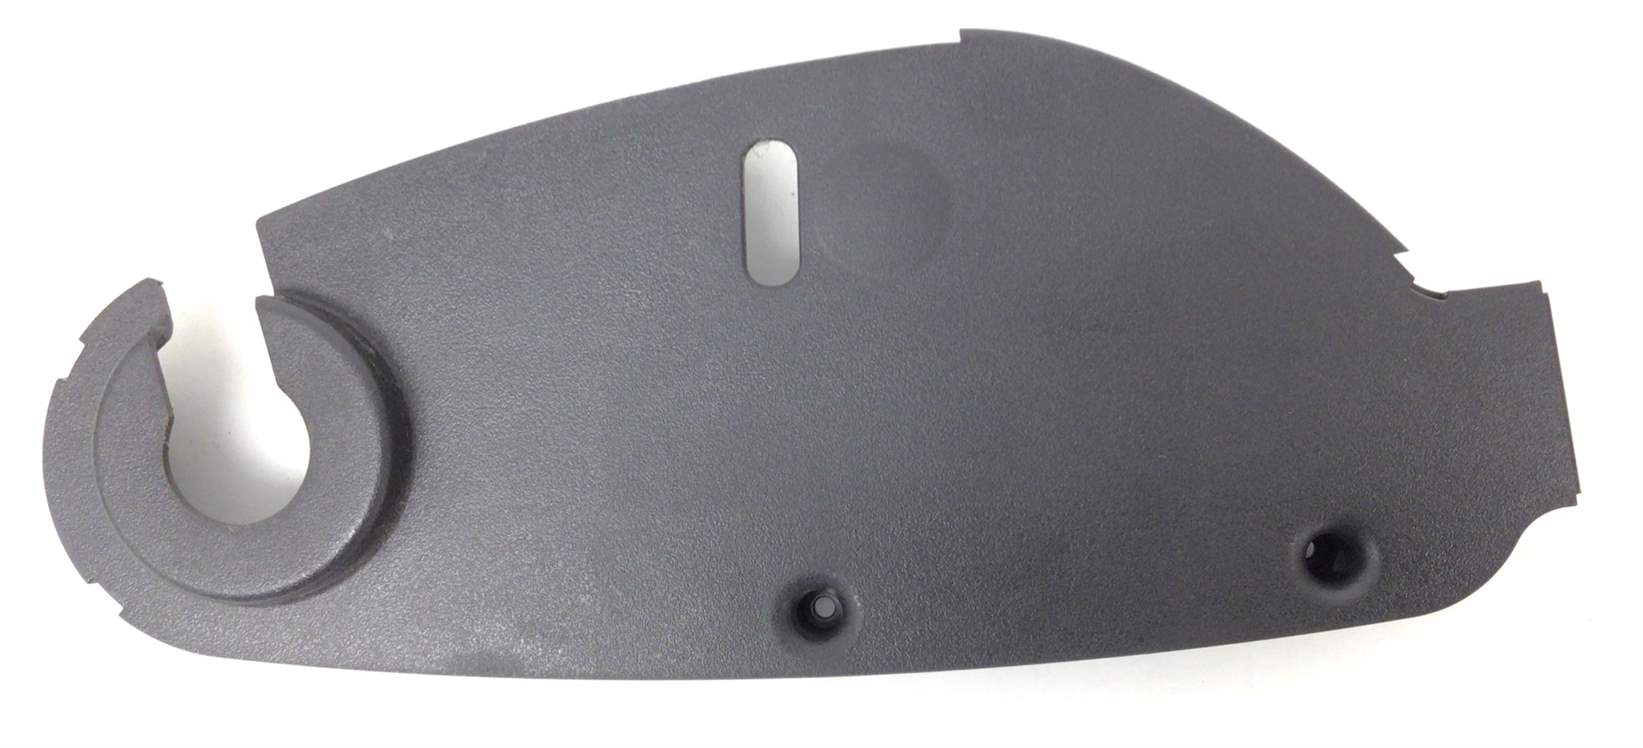 Right Rear Stride B Rail Cover (Used)